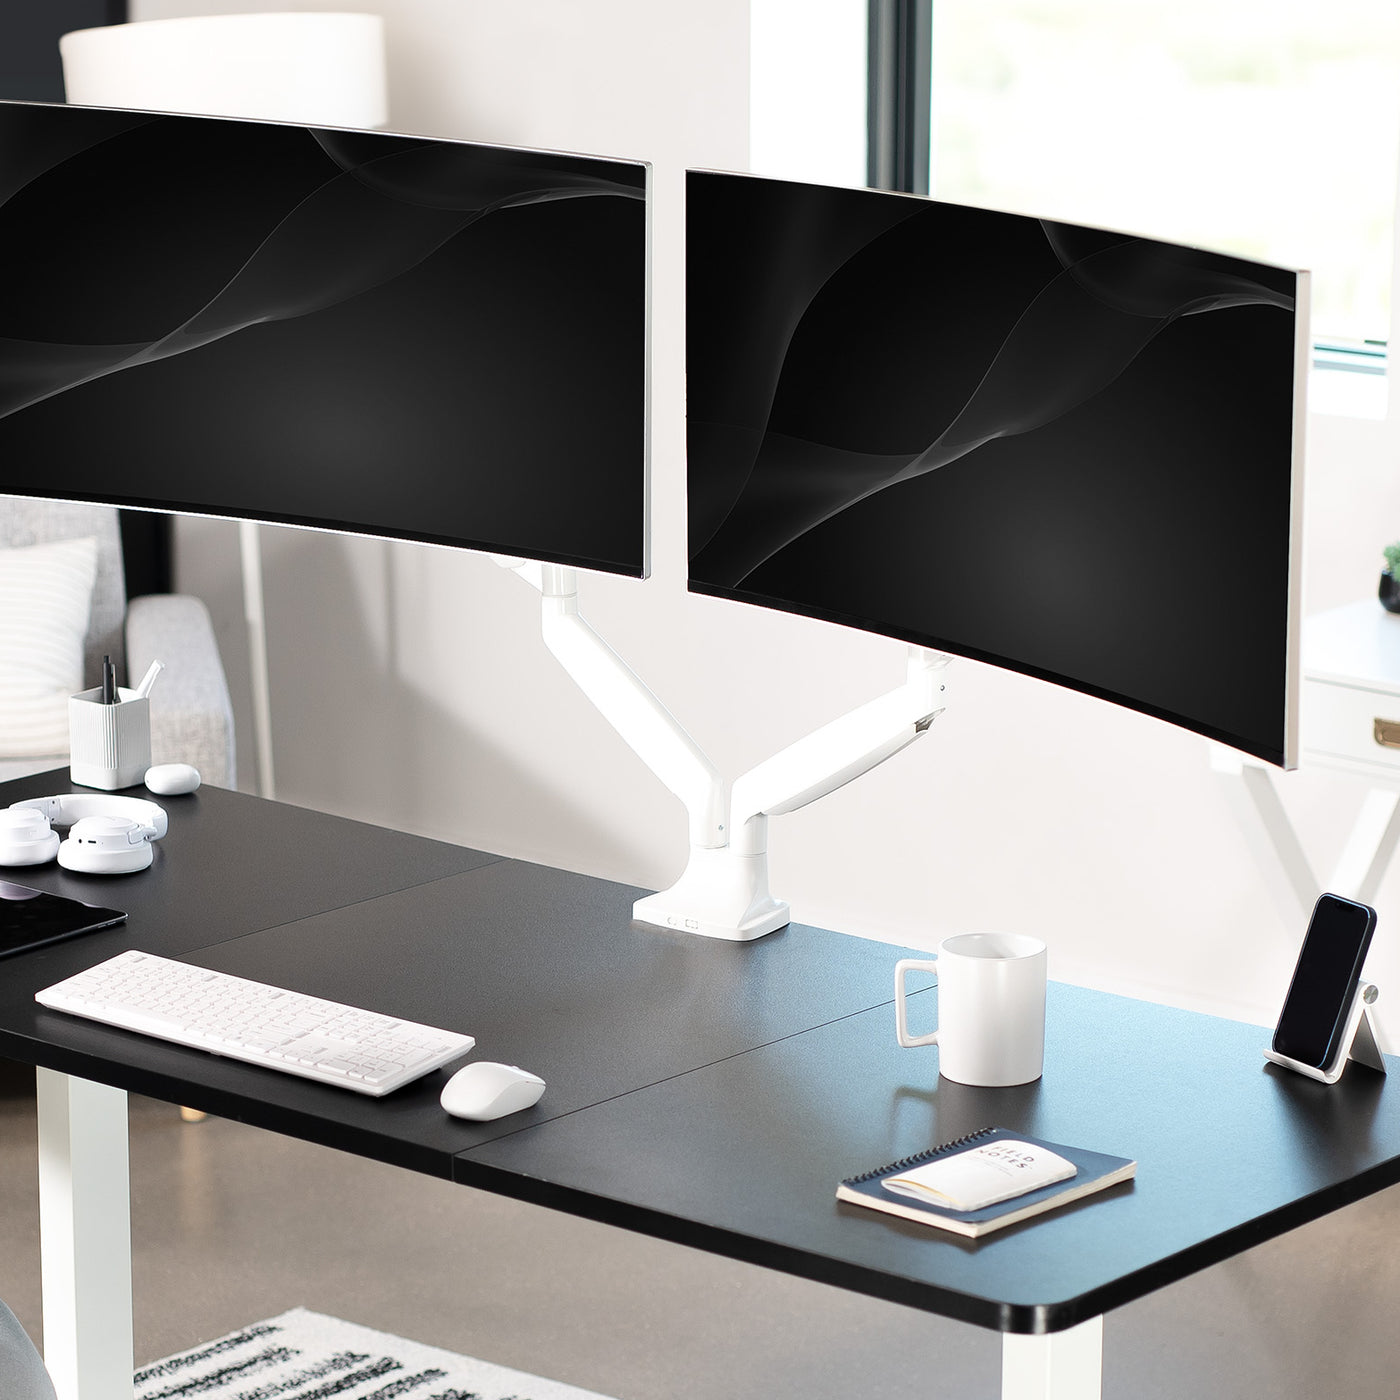 VIVO Premium Aluminum Heavy Duty Dual Monitor Mount holds two 13” to 35” monitors weighing 2.2 lbs to 30.9 lbs each, including ultra-wide screens.